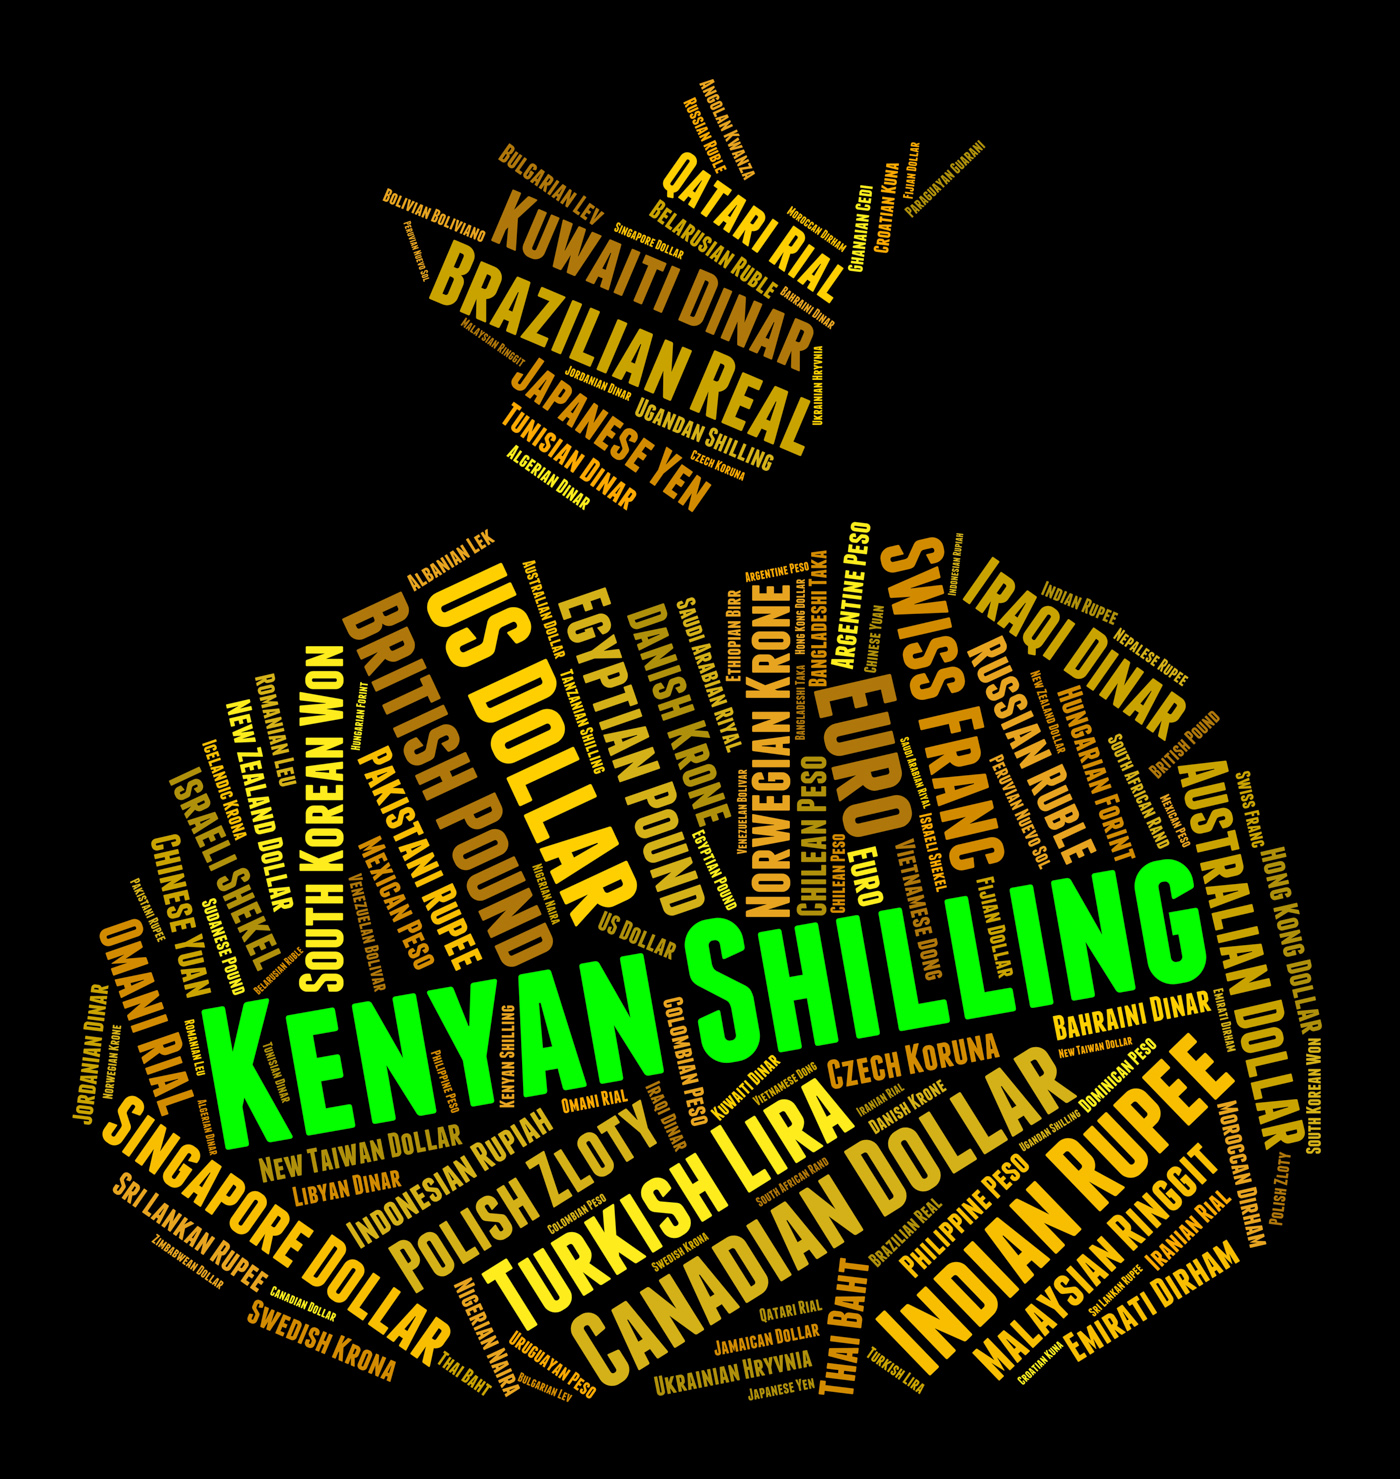 Kenyan Shilling Represents Foreign Currency And Banknote, Banknote, Wordcloud, Word, Text, HQ Photo